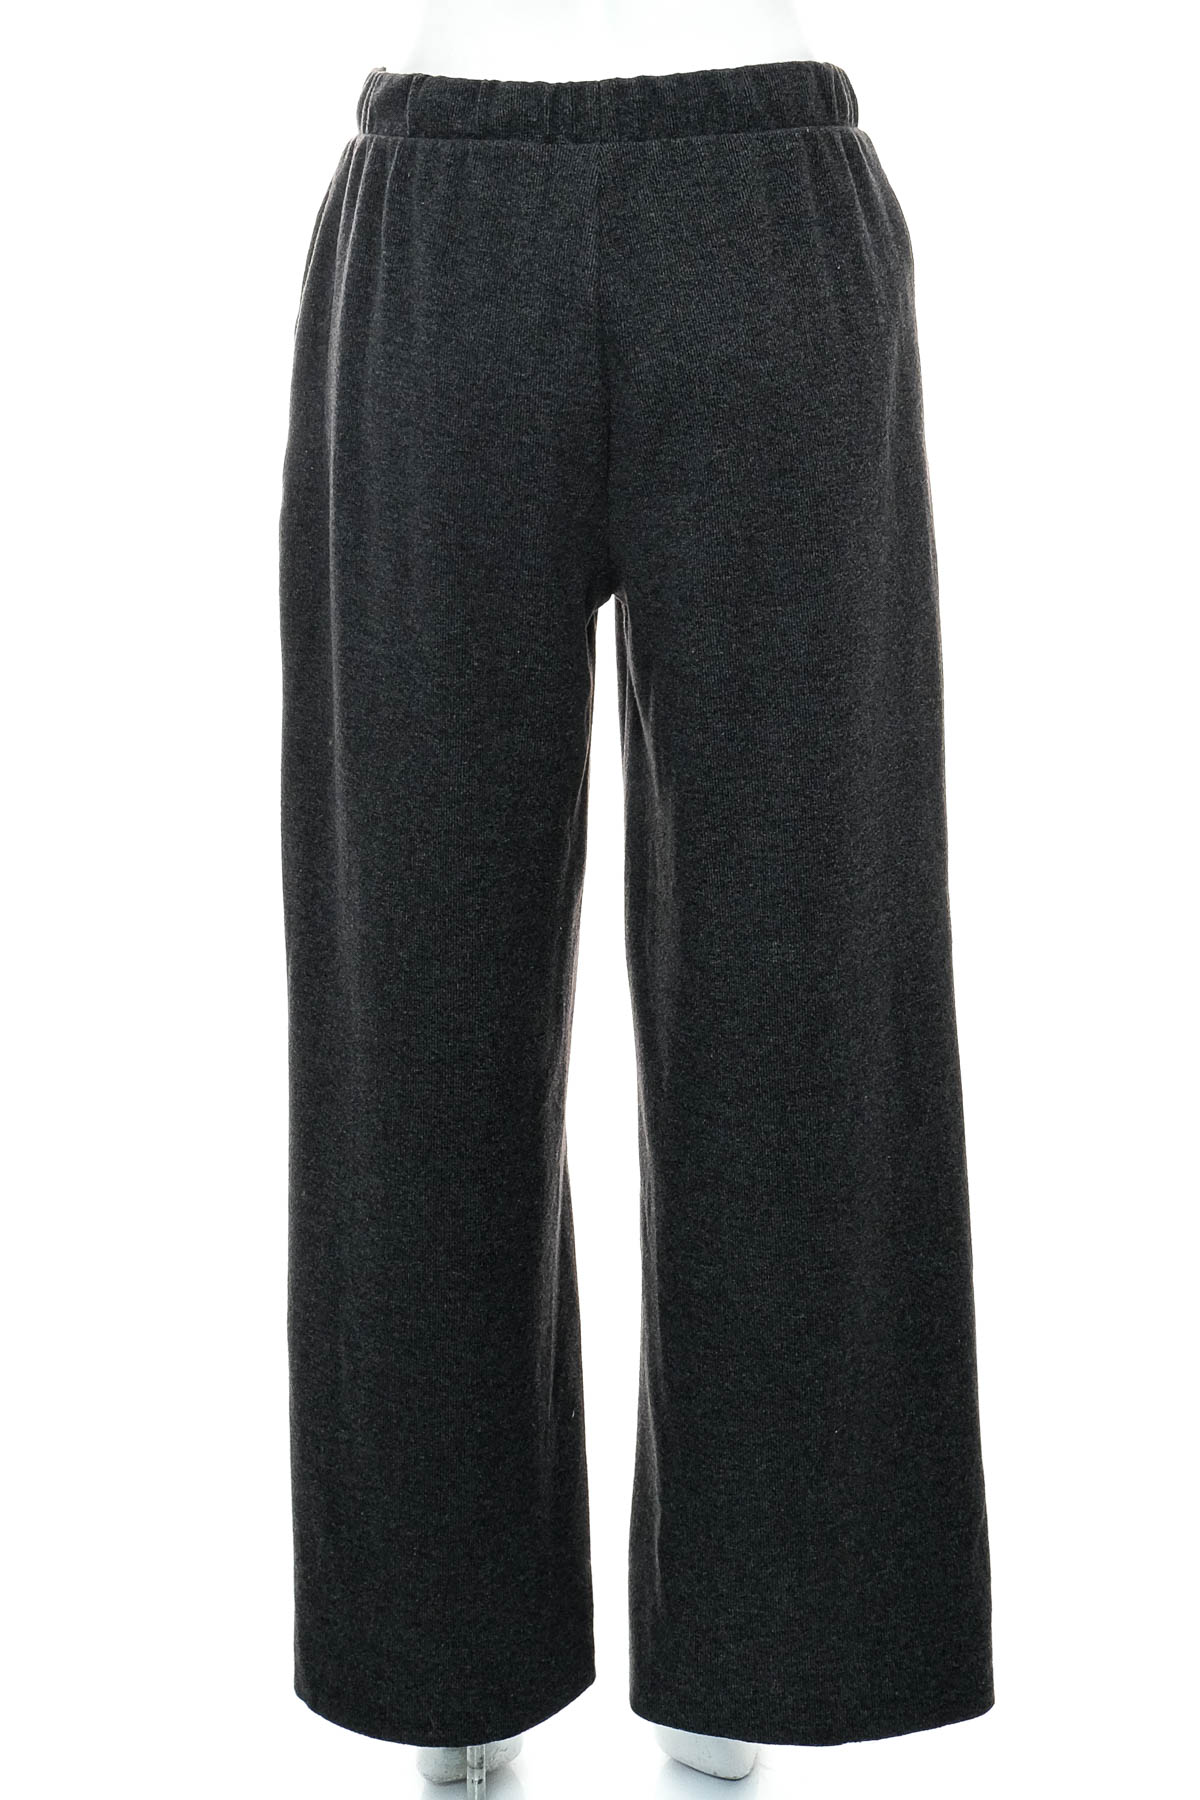 Women's trousers - MVN THE LABEL - 1